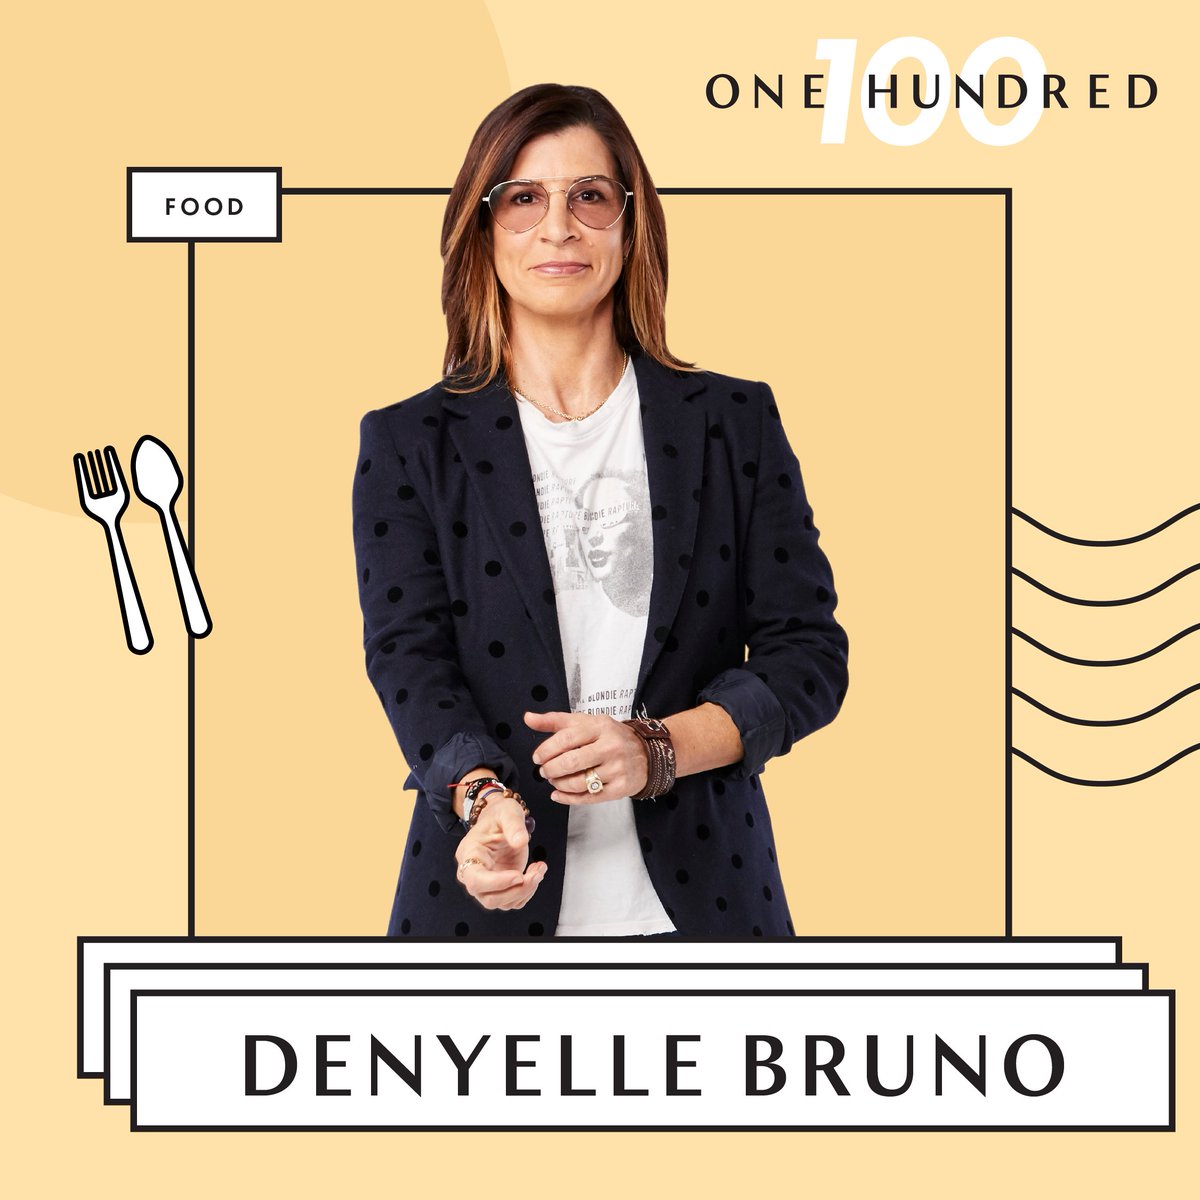 We are so excited to have our CEO Denyelle Bruno featured on this year's #CreateCultivate100 list in the Food category! Go to createcultivate.com/blog/food-deny… to read the full interview.